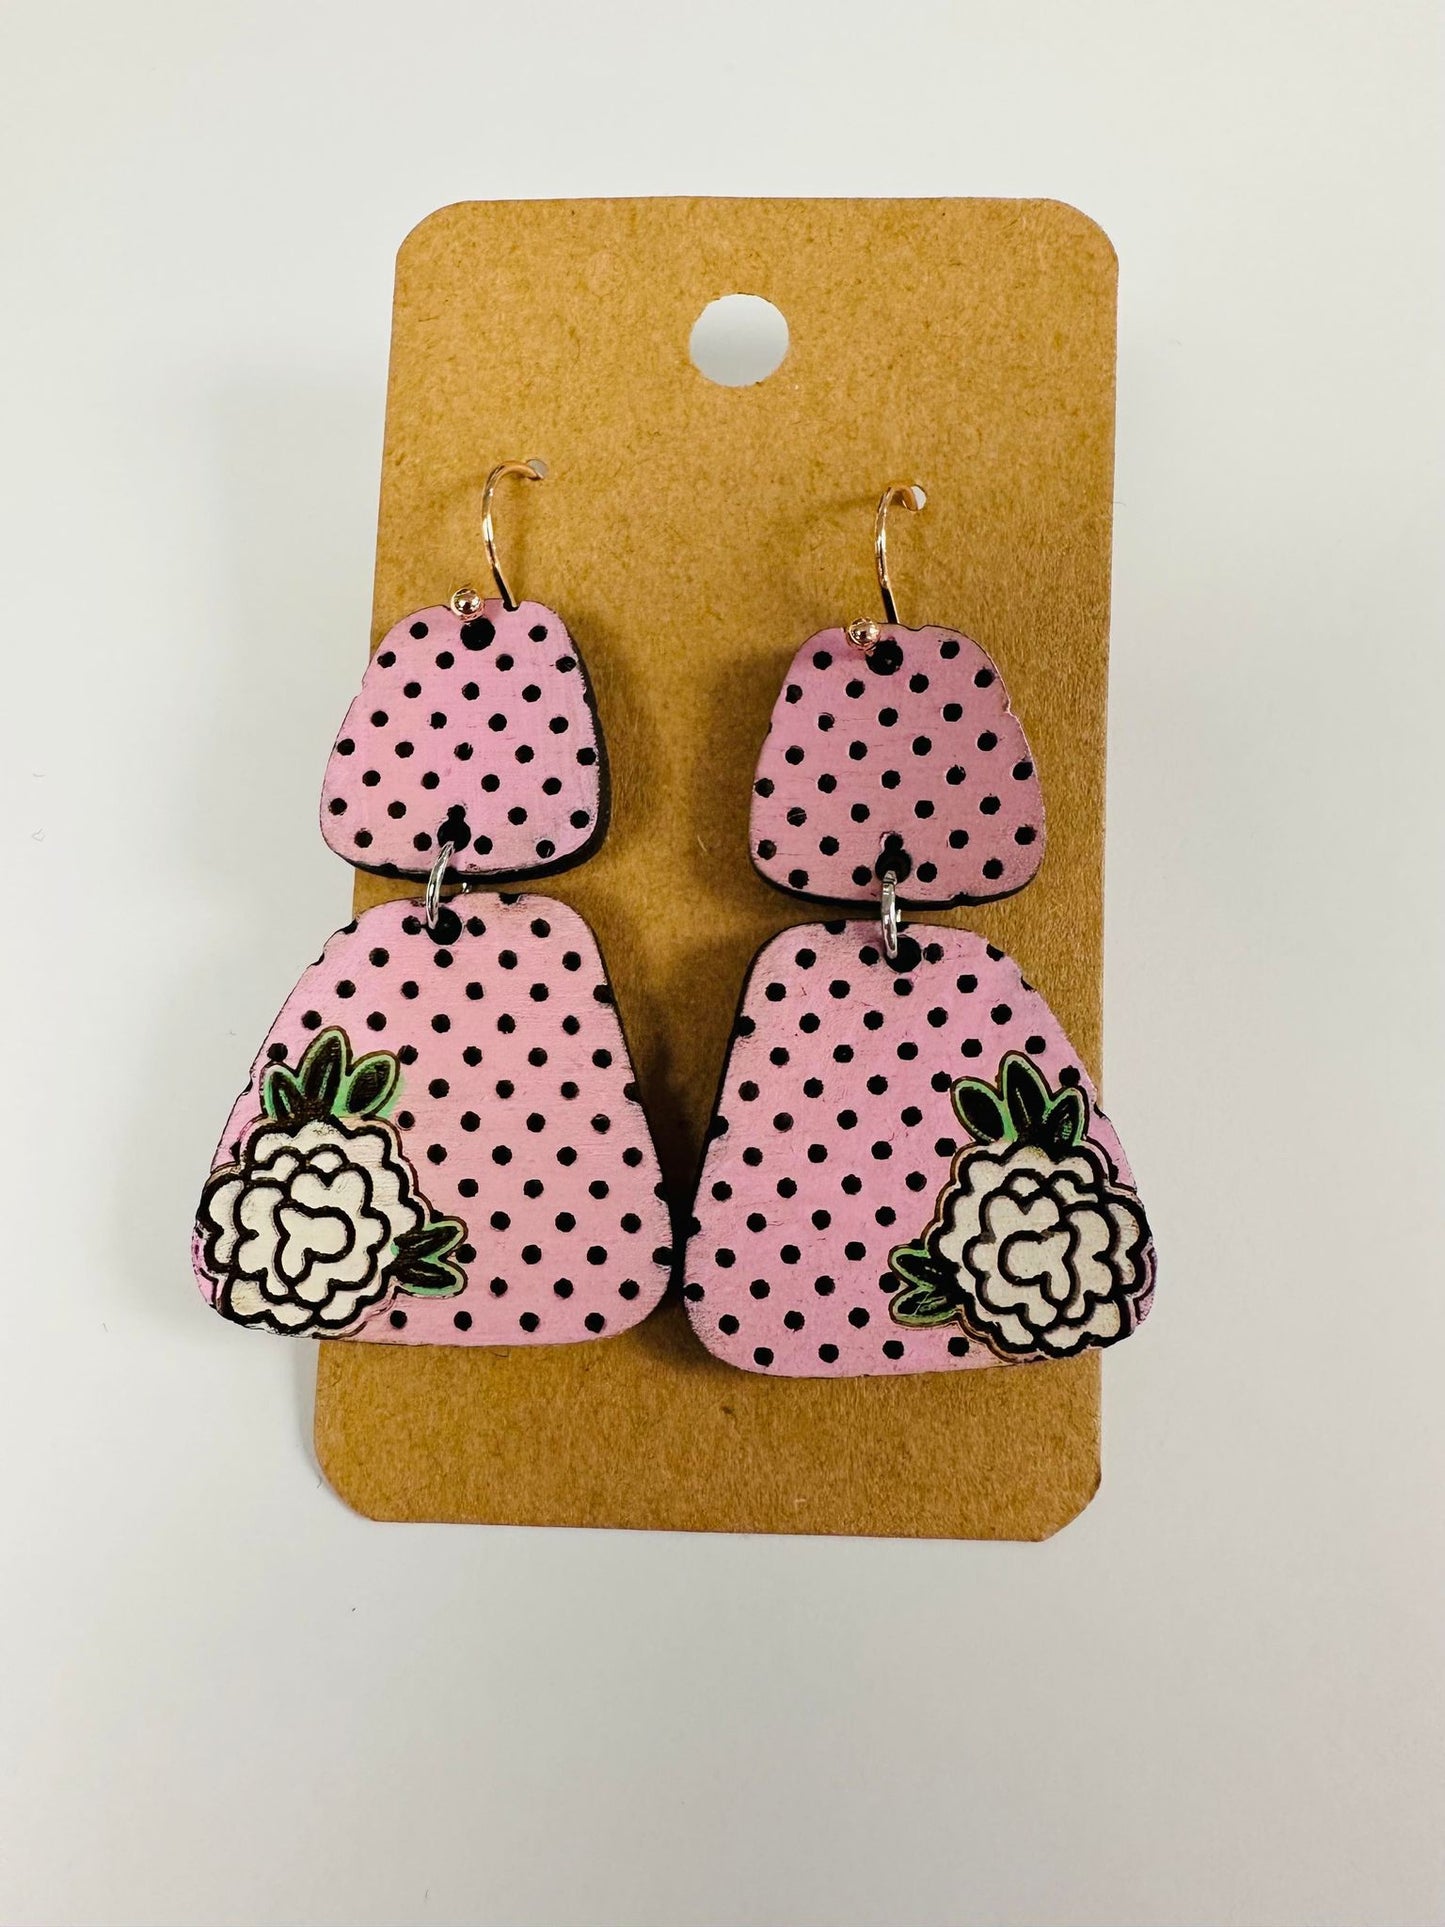 Pink Polka Dot Crafted Earrings